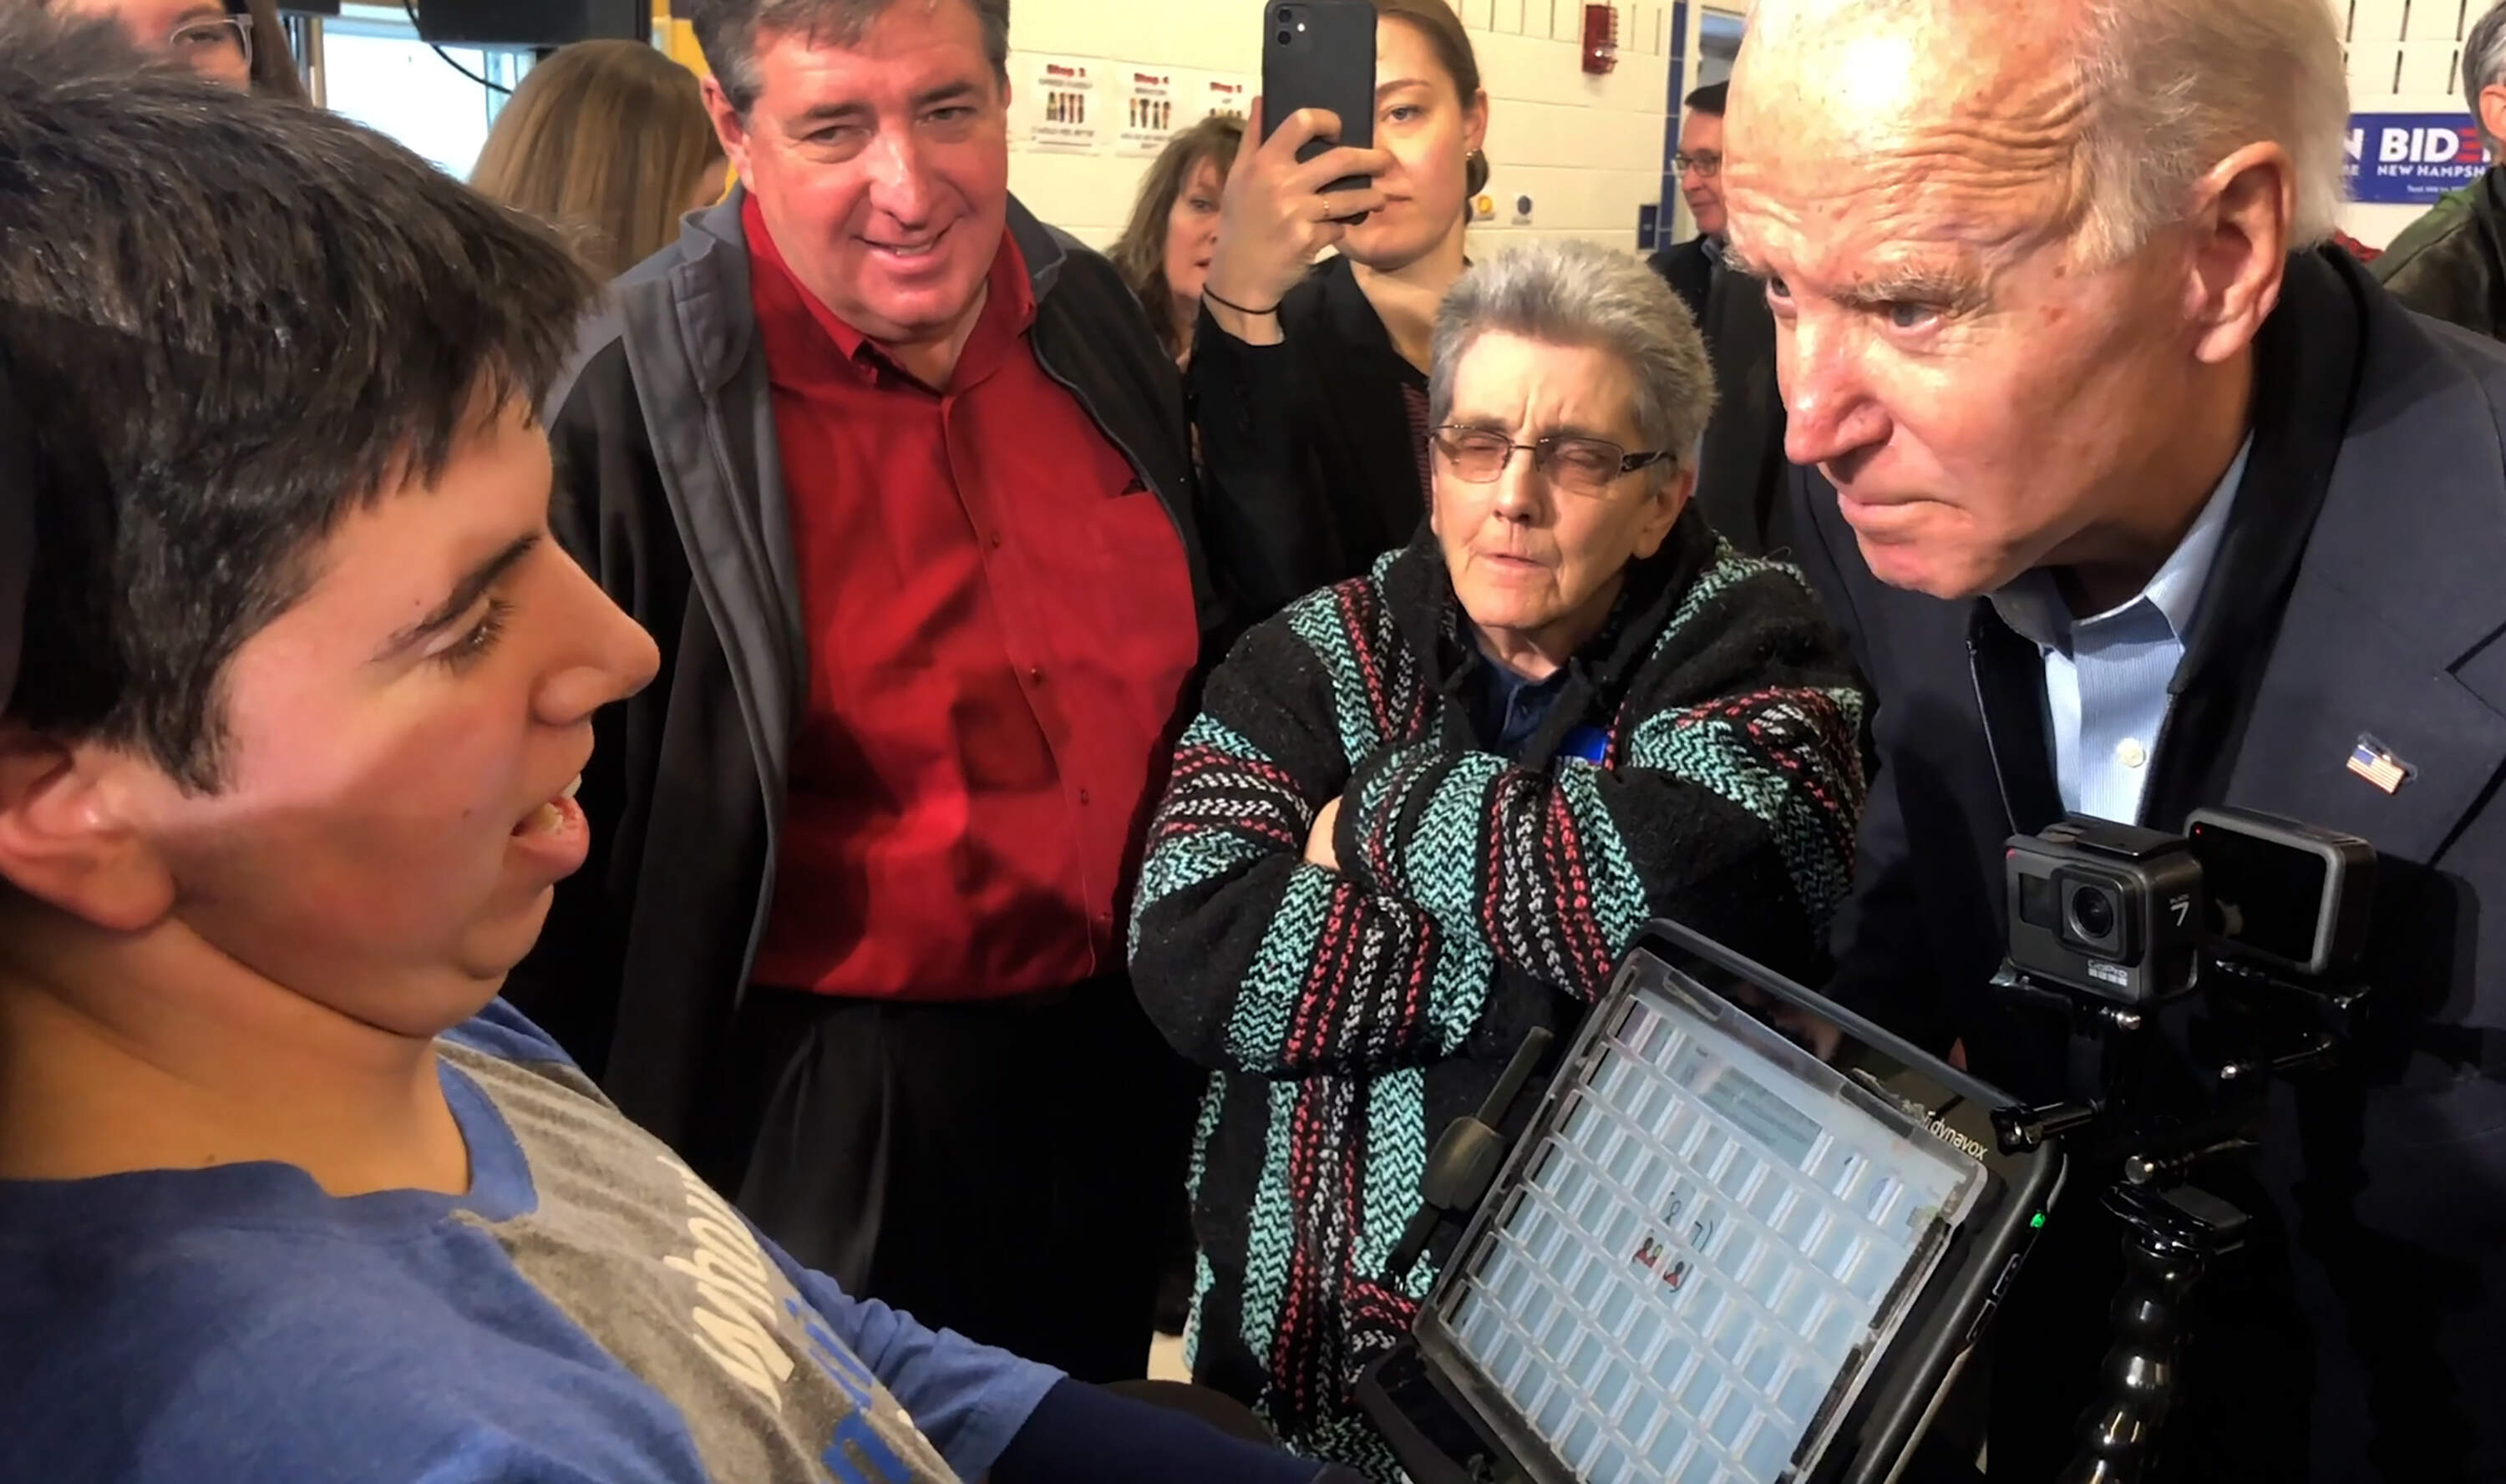 Samuel Habib, left, films with his two GoPro cameras during an encounter with then-Vice-President Joe Biden during the lead-up to the New Hampshire presidential primary in January 2020. Samuel was asking Biden about his stand on inclusiveeducation for students with disabilities, and during his answer Biden stroked Samuel’s face, creating a viral moment. (Dan Habib/LikeRightNow Films)